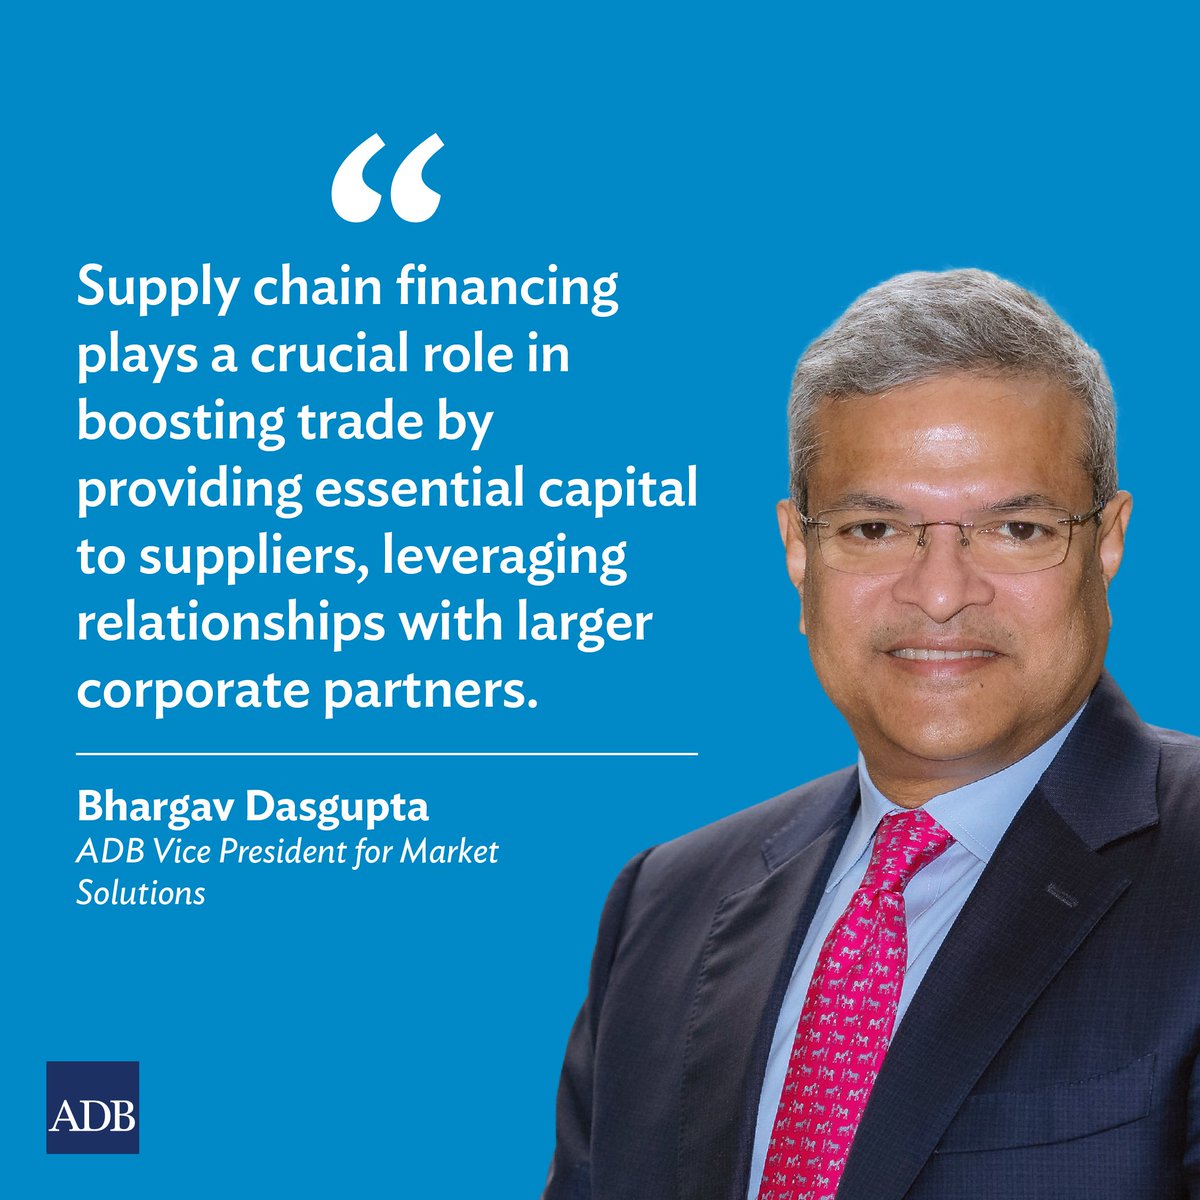 #ADBNews: We have partnered with Citi to enhance access to supply chain financing for small and medium-sized enterprises and support additional annual trade across Asia and the Pacific. 

Read more: ow.ly/VITO50Rx10M